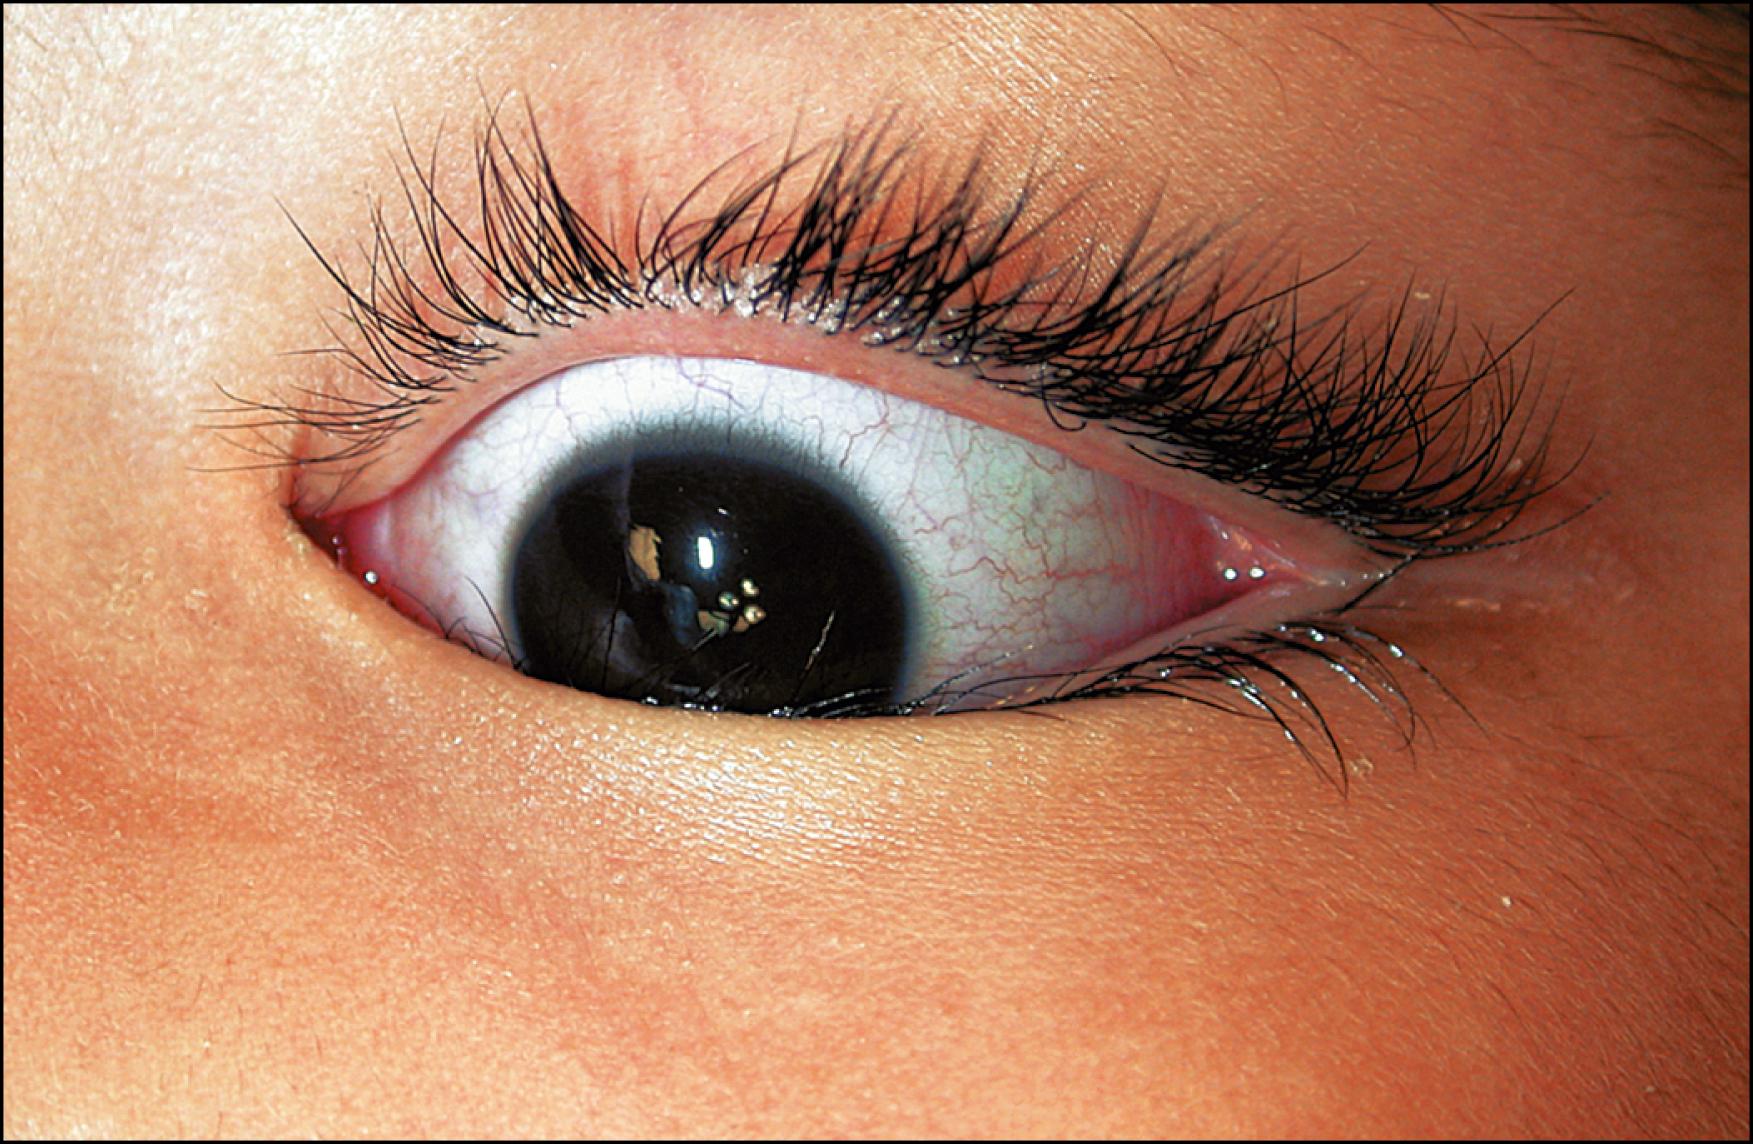 Fig. 35.1, Left lower eyelid epiblepharon causing the eyelashes to rotate in and rub against the cornea. This can cause chronic ocular irritation and overproduction of tears.